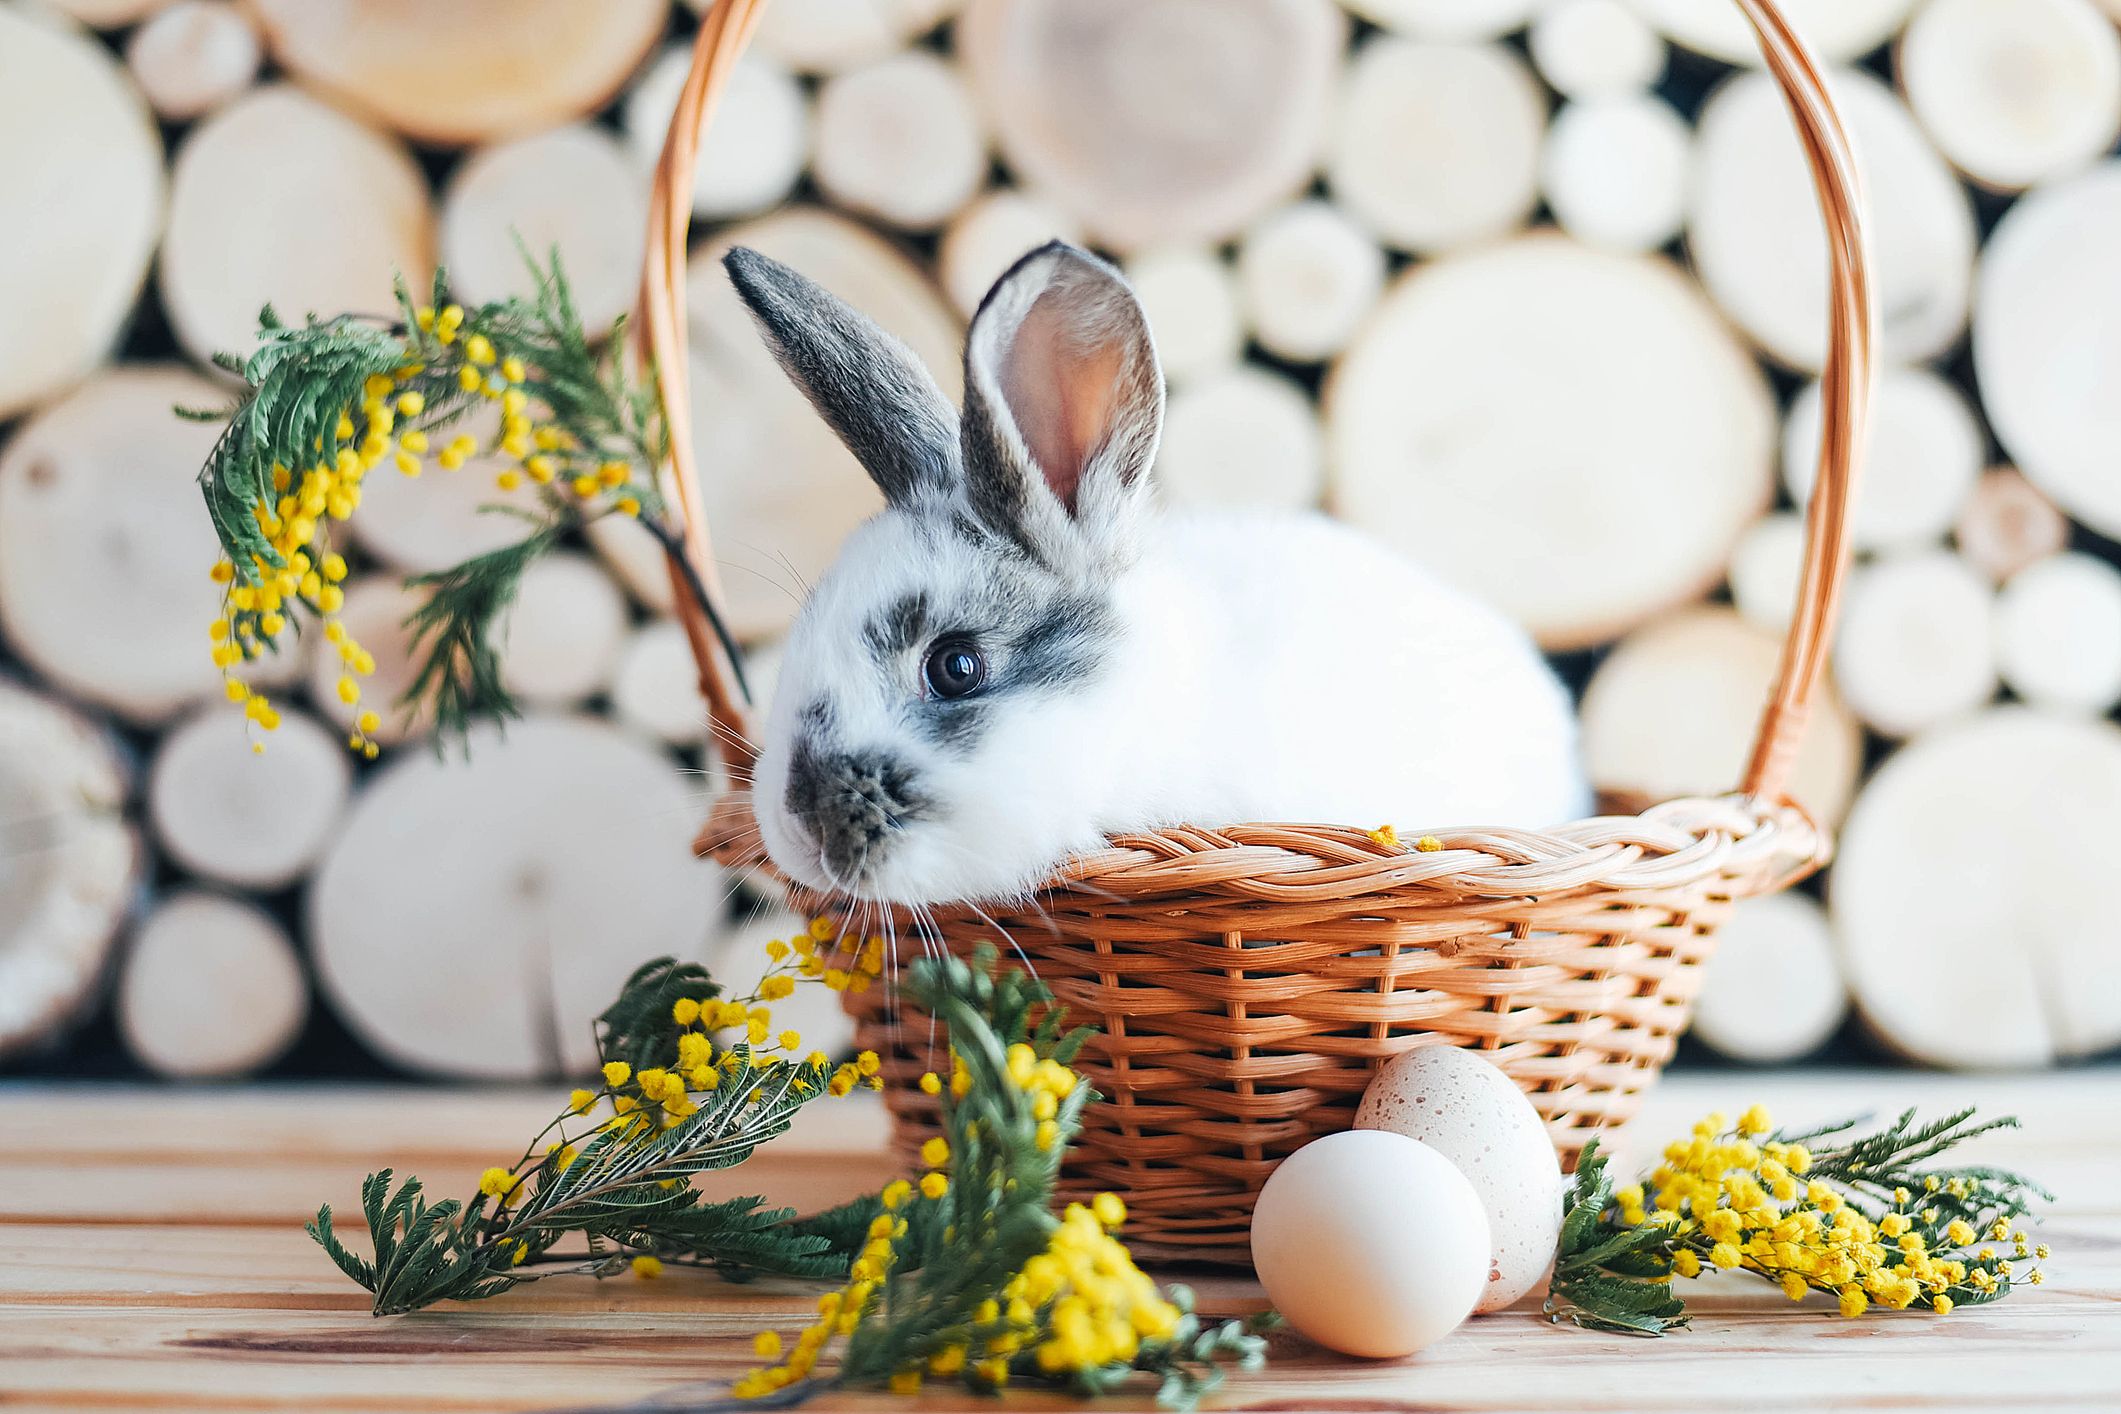 Easter Bunny Origins - The Fascinating History of the Easter Bunny